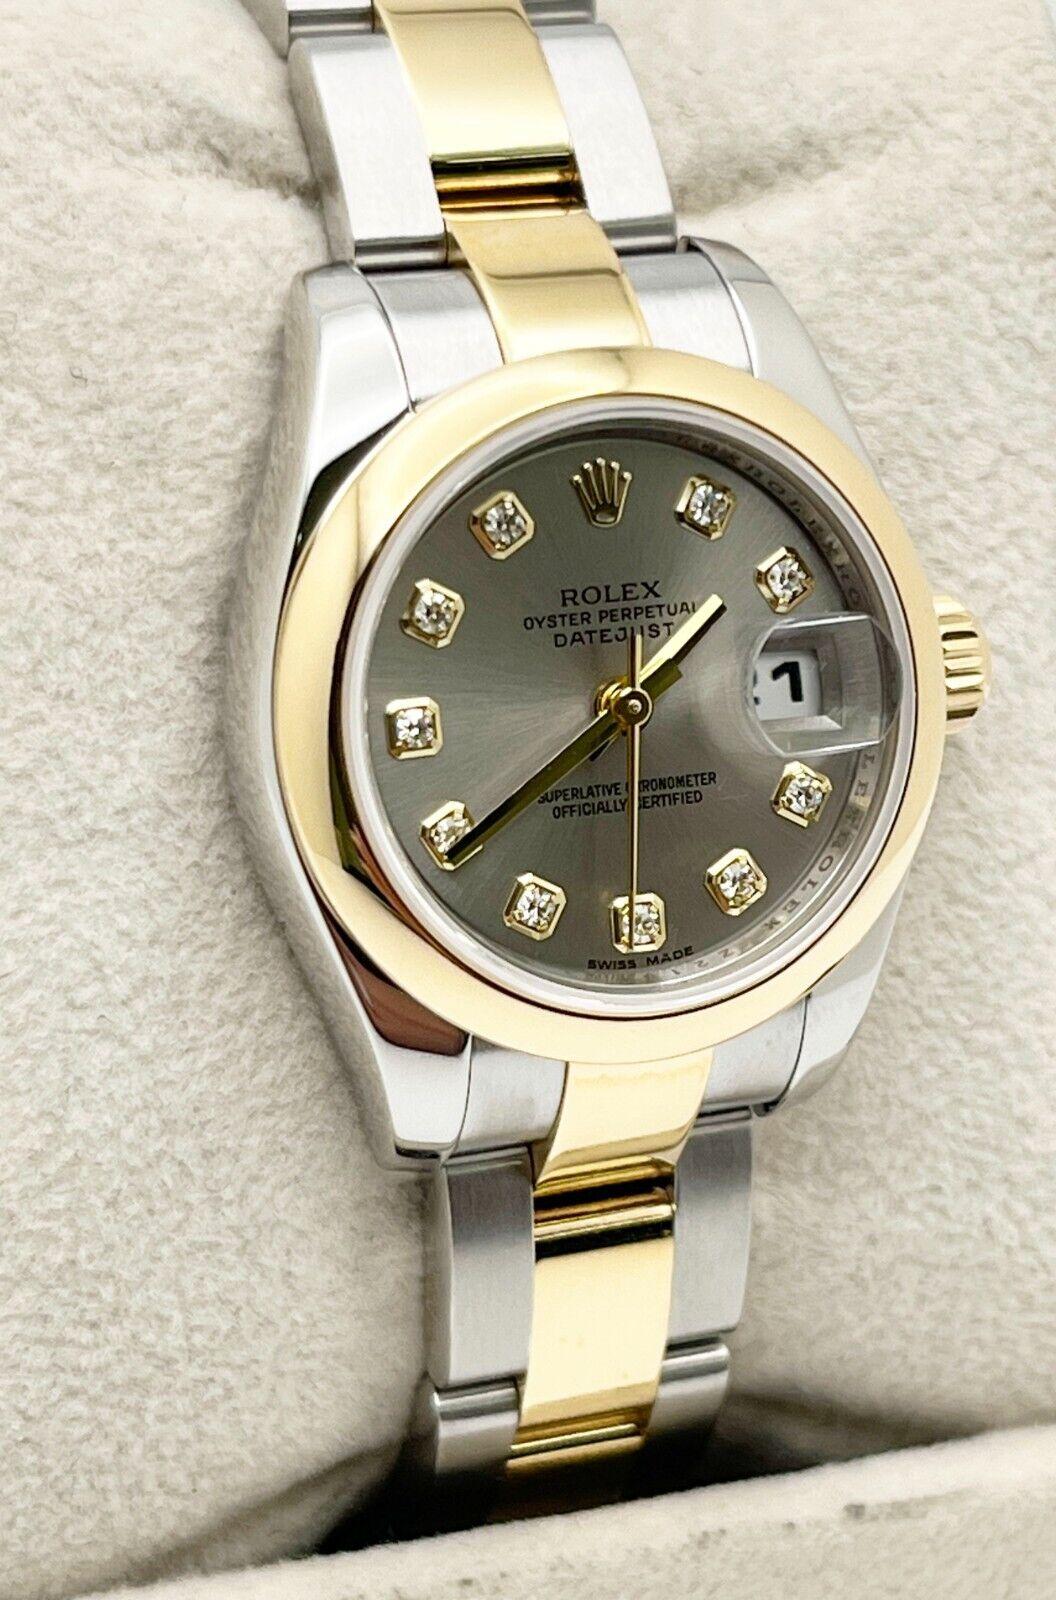 Style Number: 179163

Serial: Z213***

Year: 2006
 
Model: Ladies Datejust
 
Case Material: Stainless Steel
 
Band: 18K Yellow Gold & Stainless Steel
 
Bezel: 18K Yellow Gold
 
Dial: Factory Silver Diamond Dial 
 
Face: Sapphire Crystal
 
Case Size: